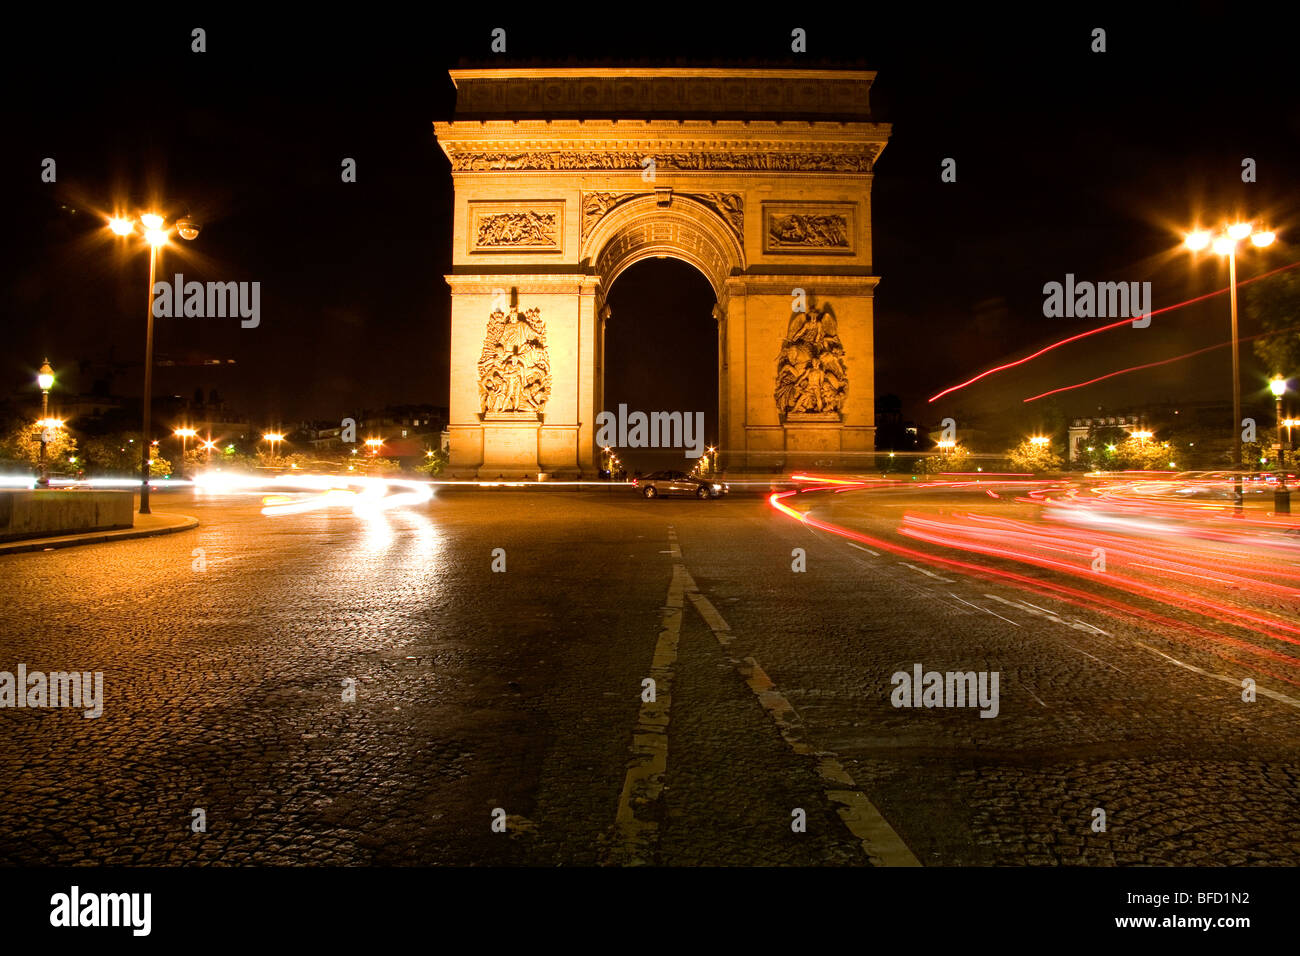 Arc de Triomphe lit at night stands in the centre of the Place Charles de Gaulle, Paris, France. Stock Photo